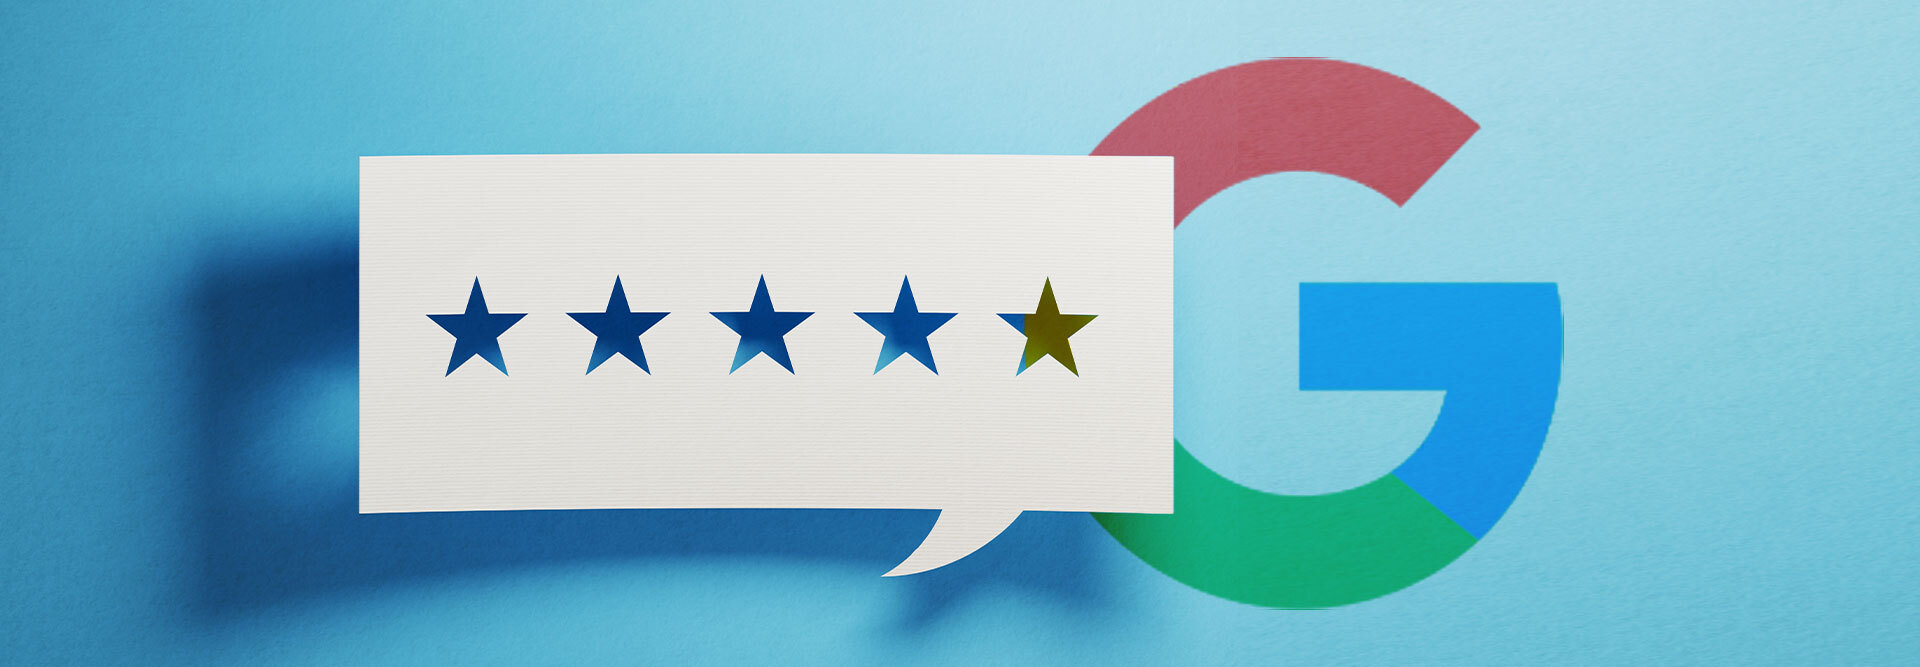 Google review management is depicted in this image with a review in a speech bubble shown in front of the Google logo.